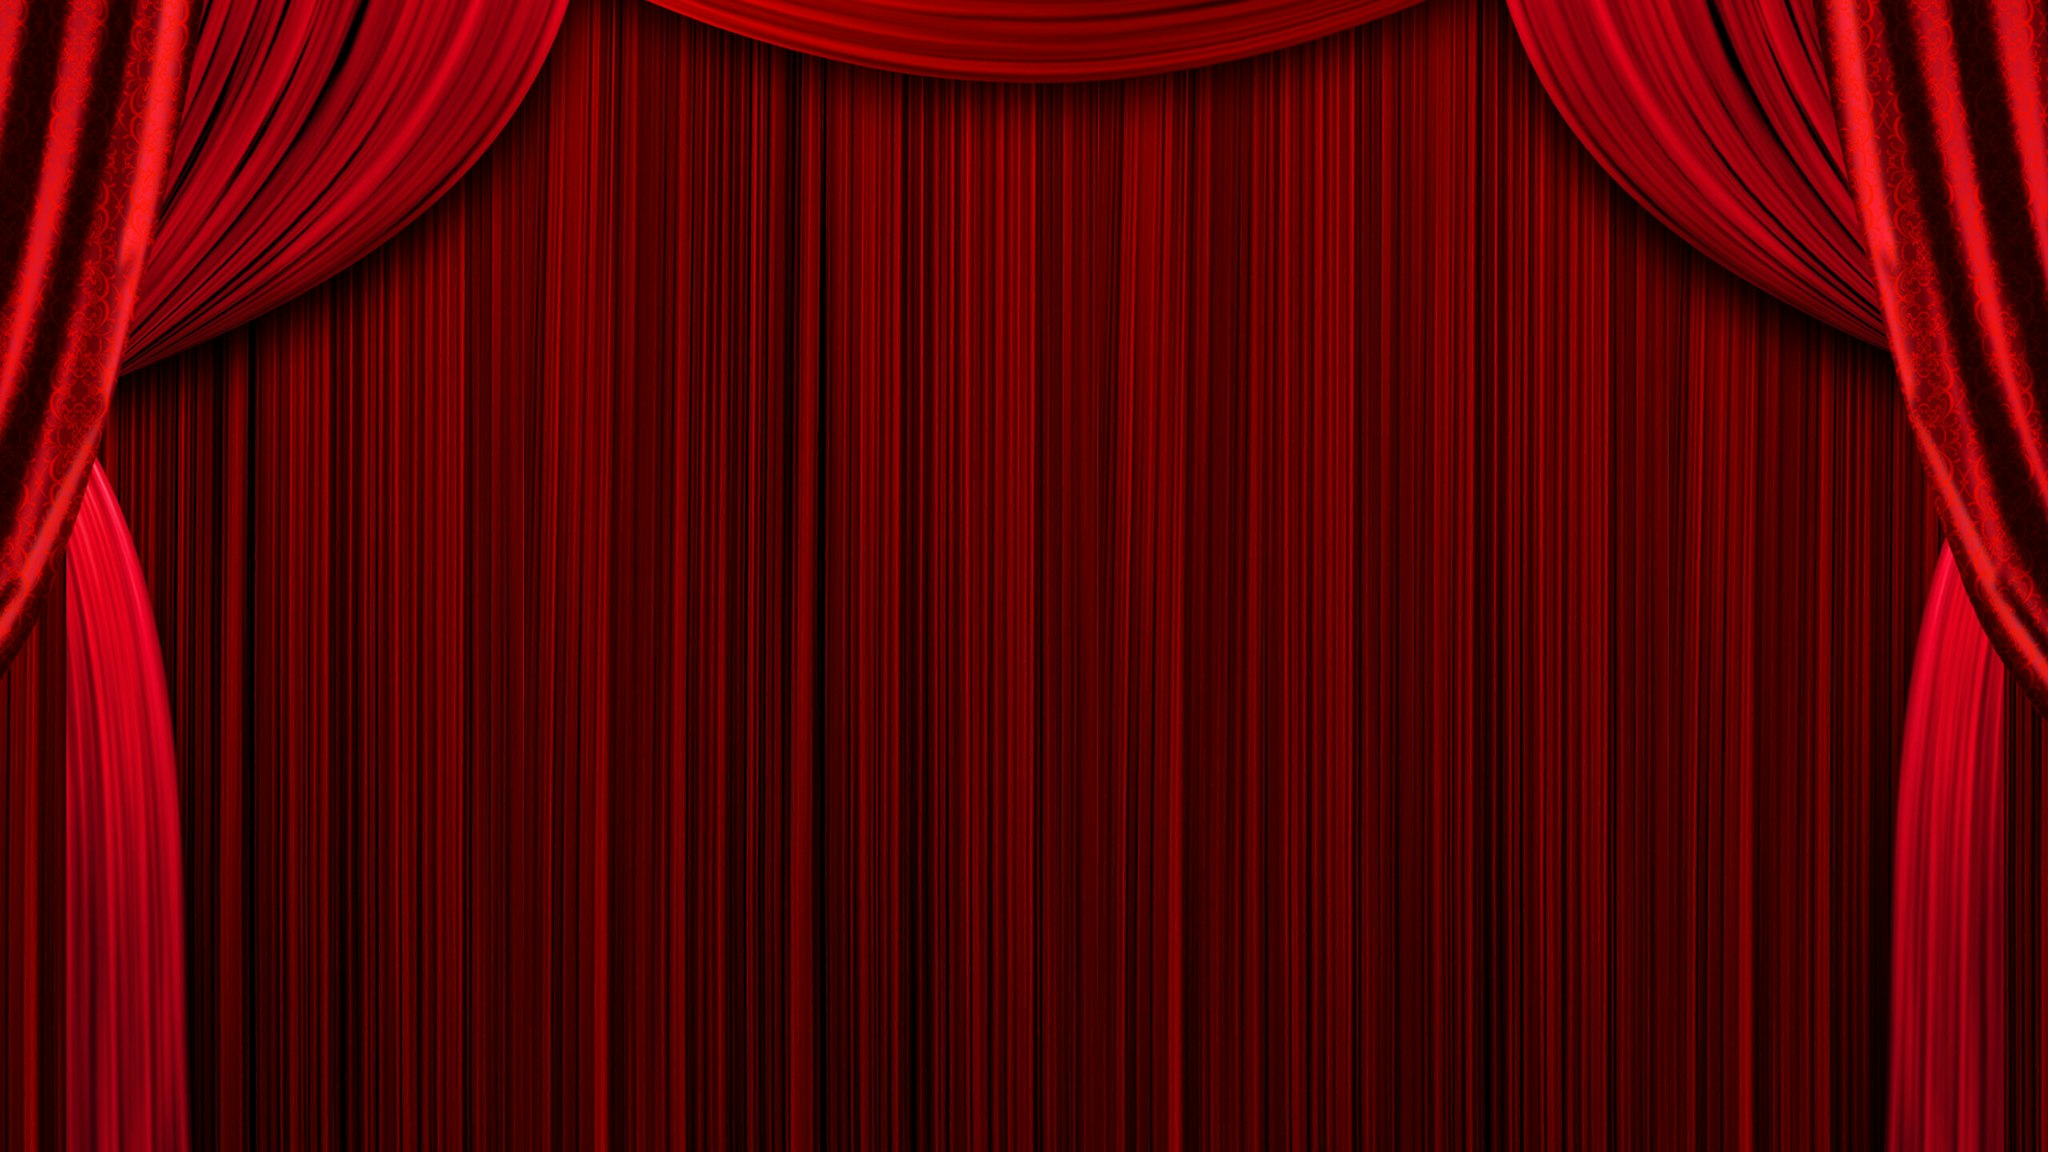 Red Curtains Theater Scene Stage Backdrop. Curtain With Space For Copy. Show Background Performance. - stock photo